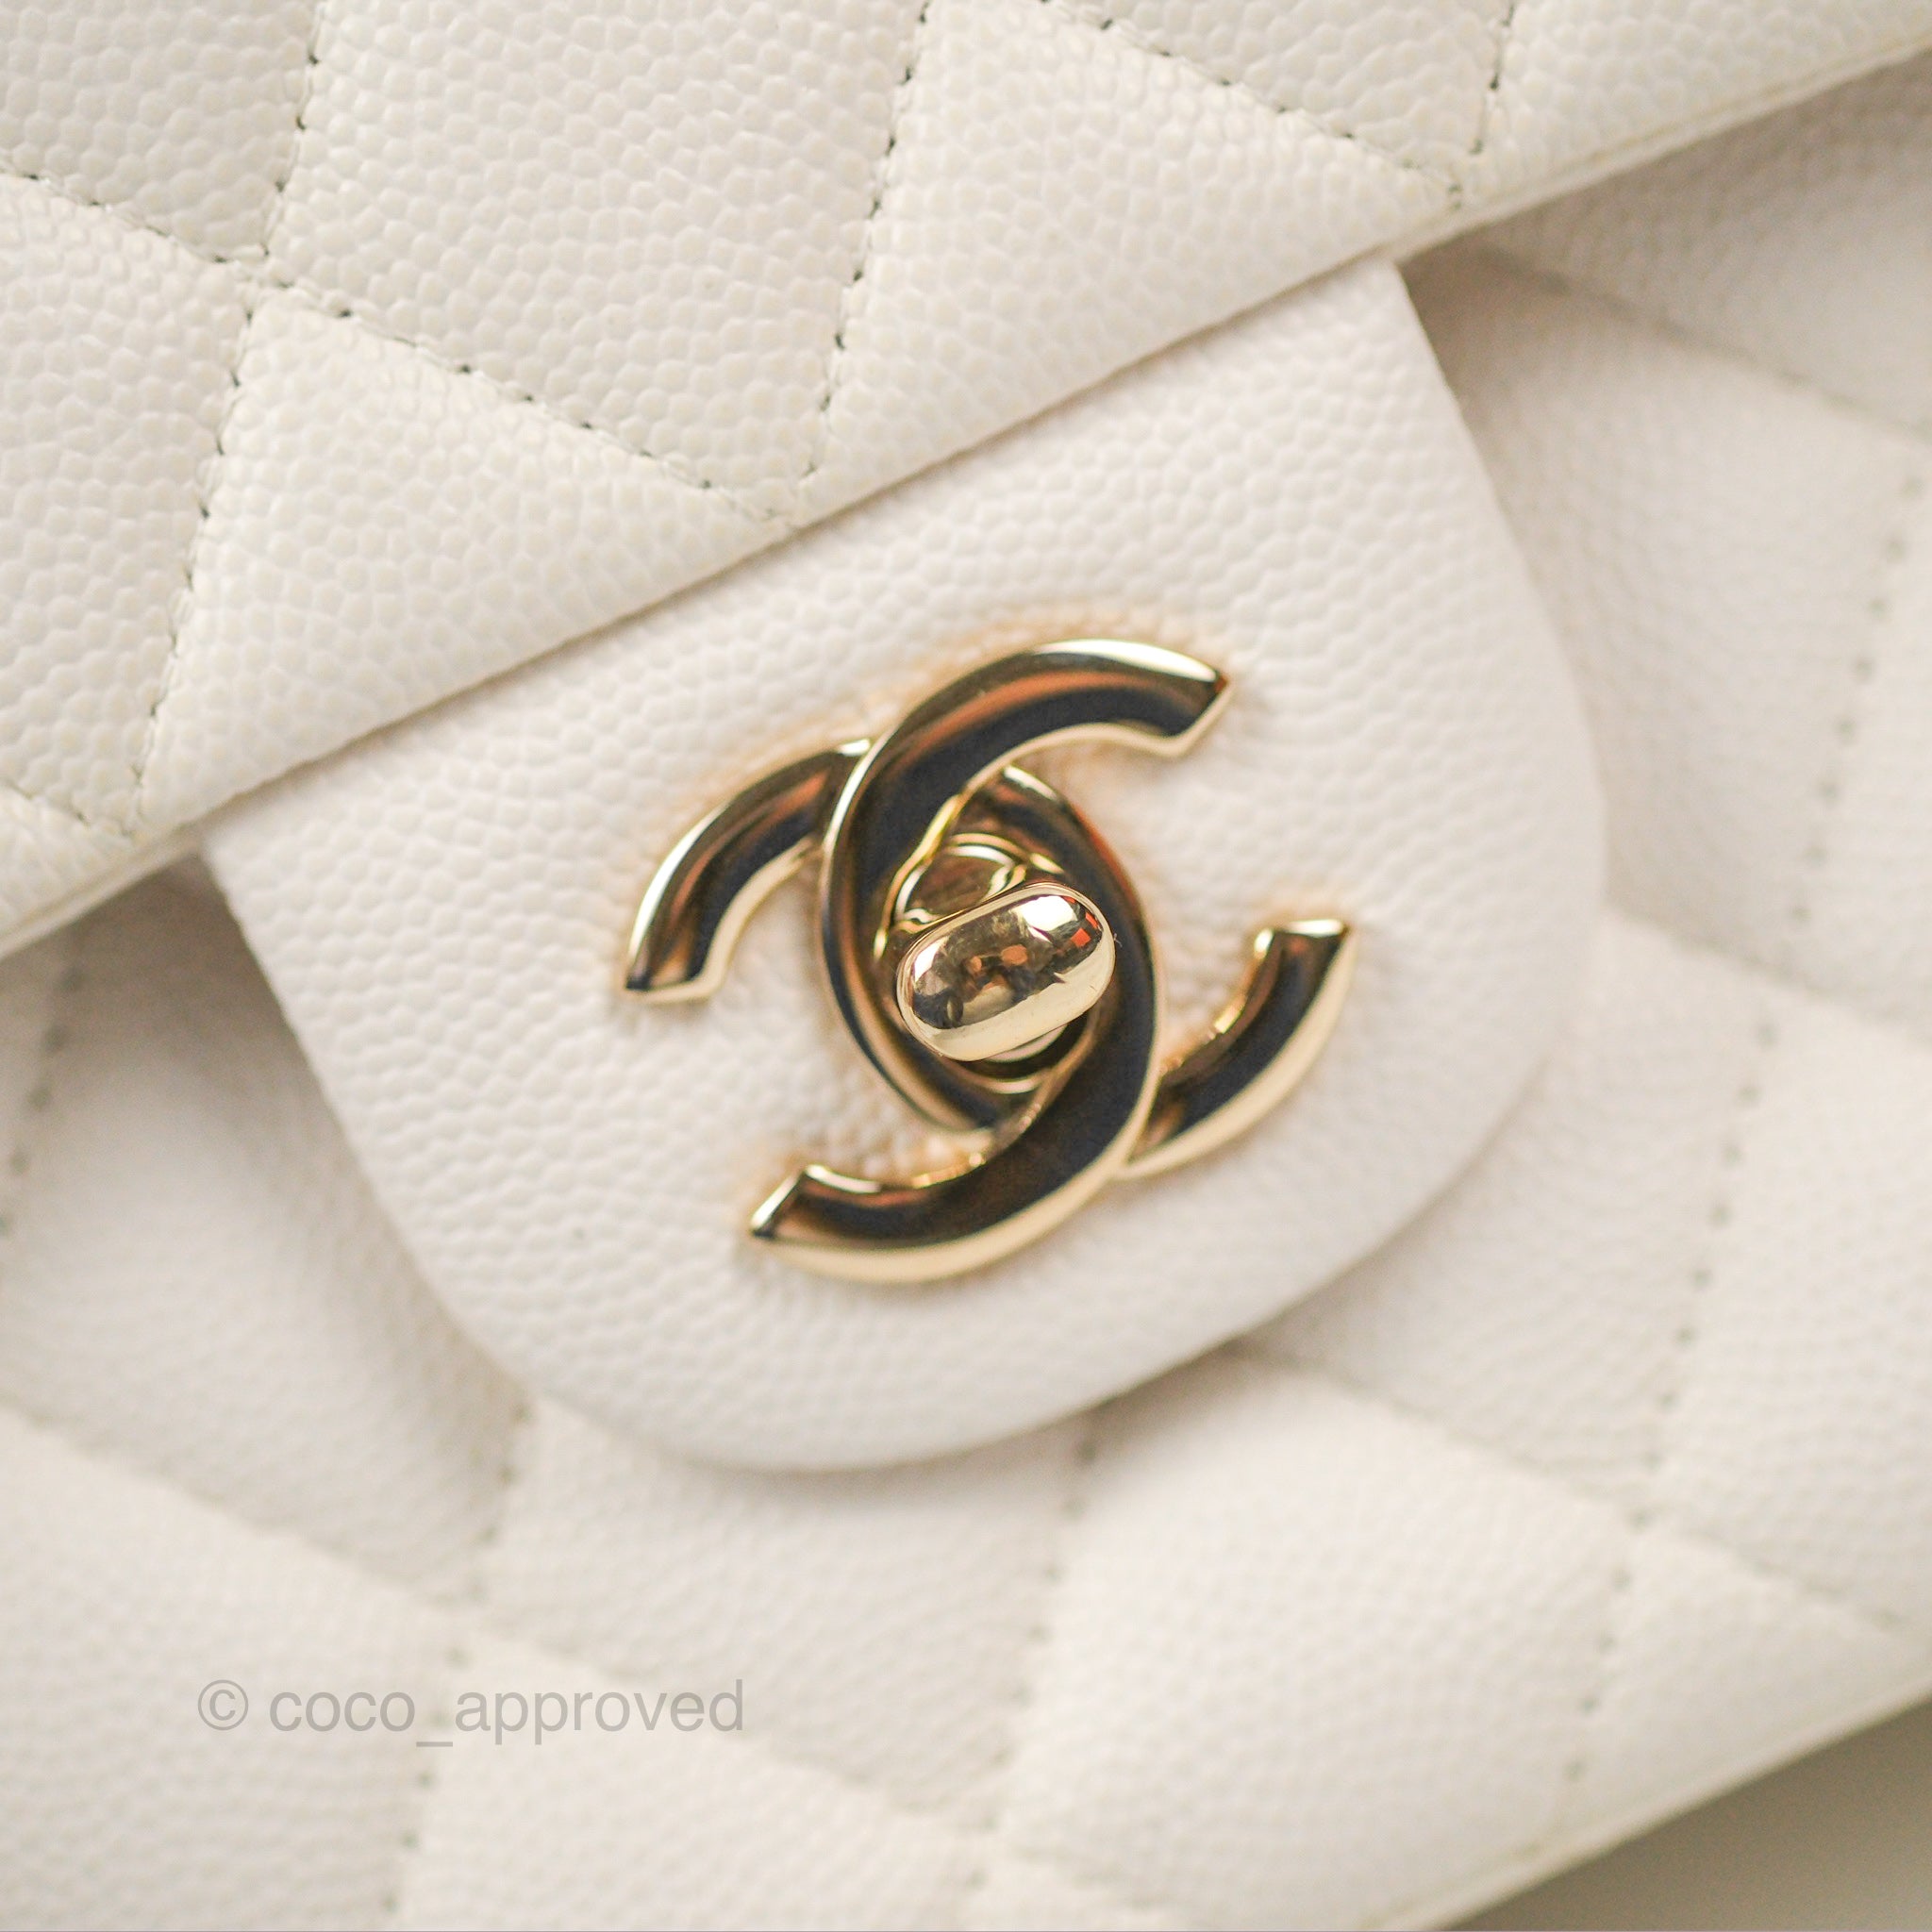 Chanel Classic Medium Double Flap 20B White Quilted Caviar with